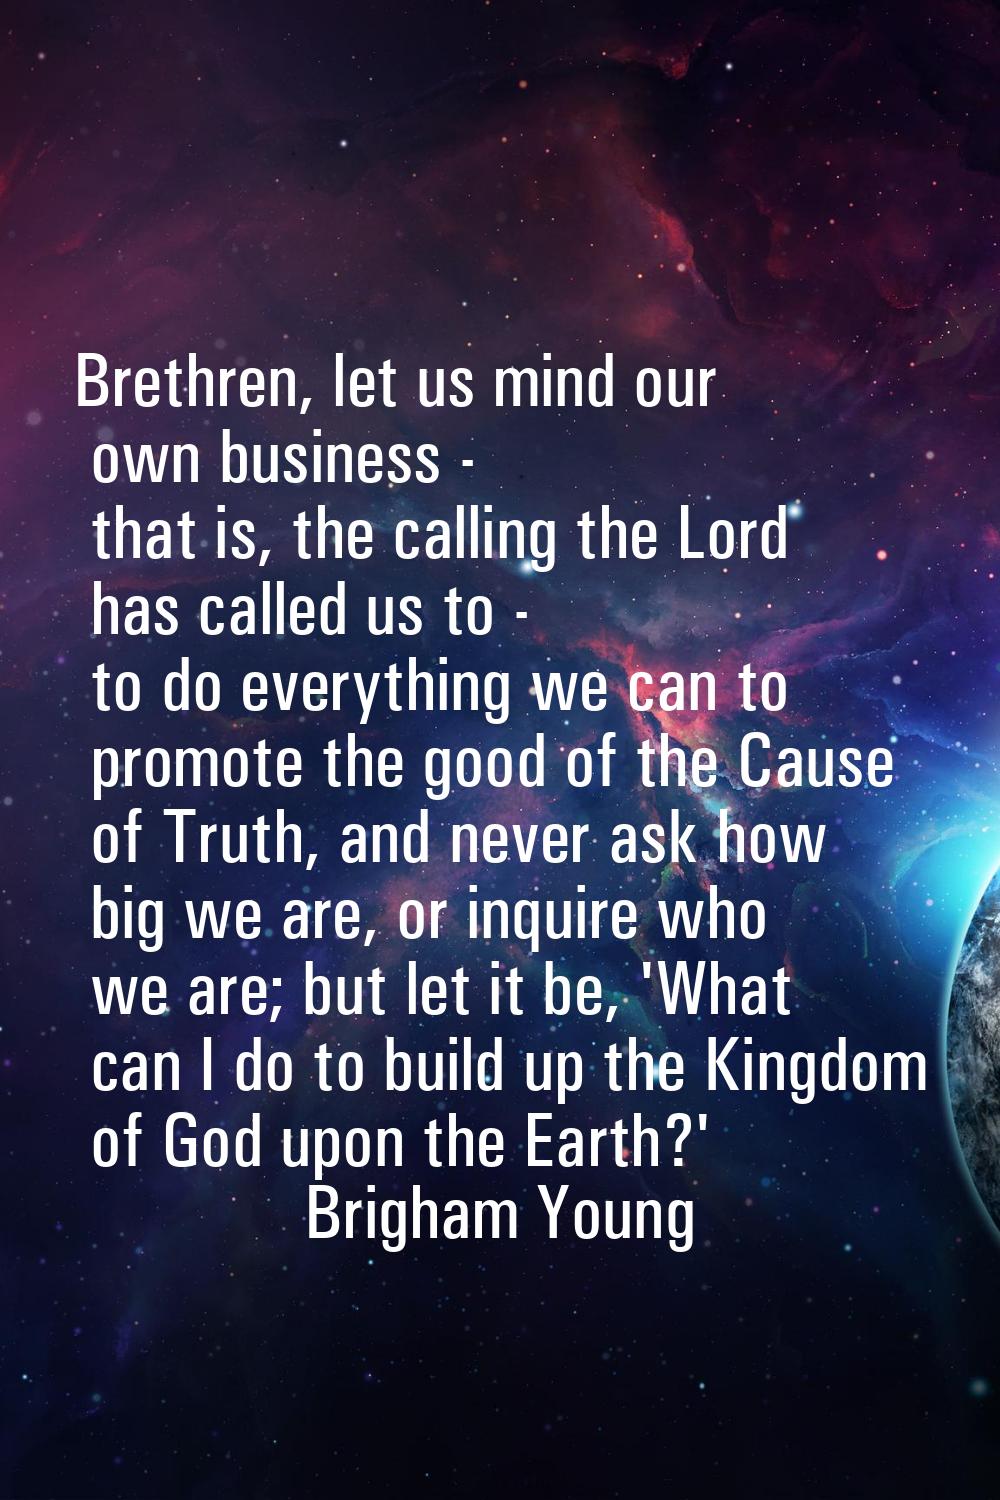 Brethren, let us mind our own business - that is, the calling the Lord has called us to - to do eve